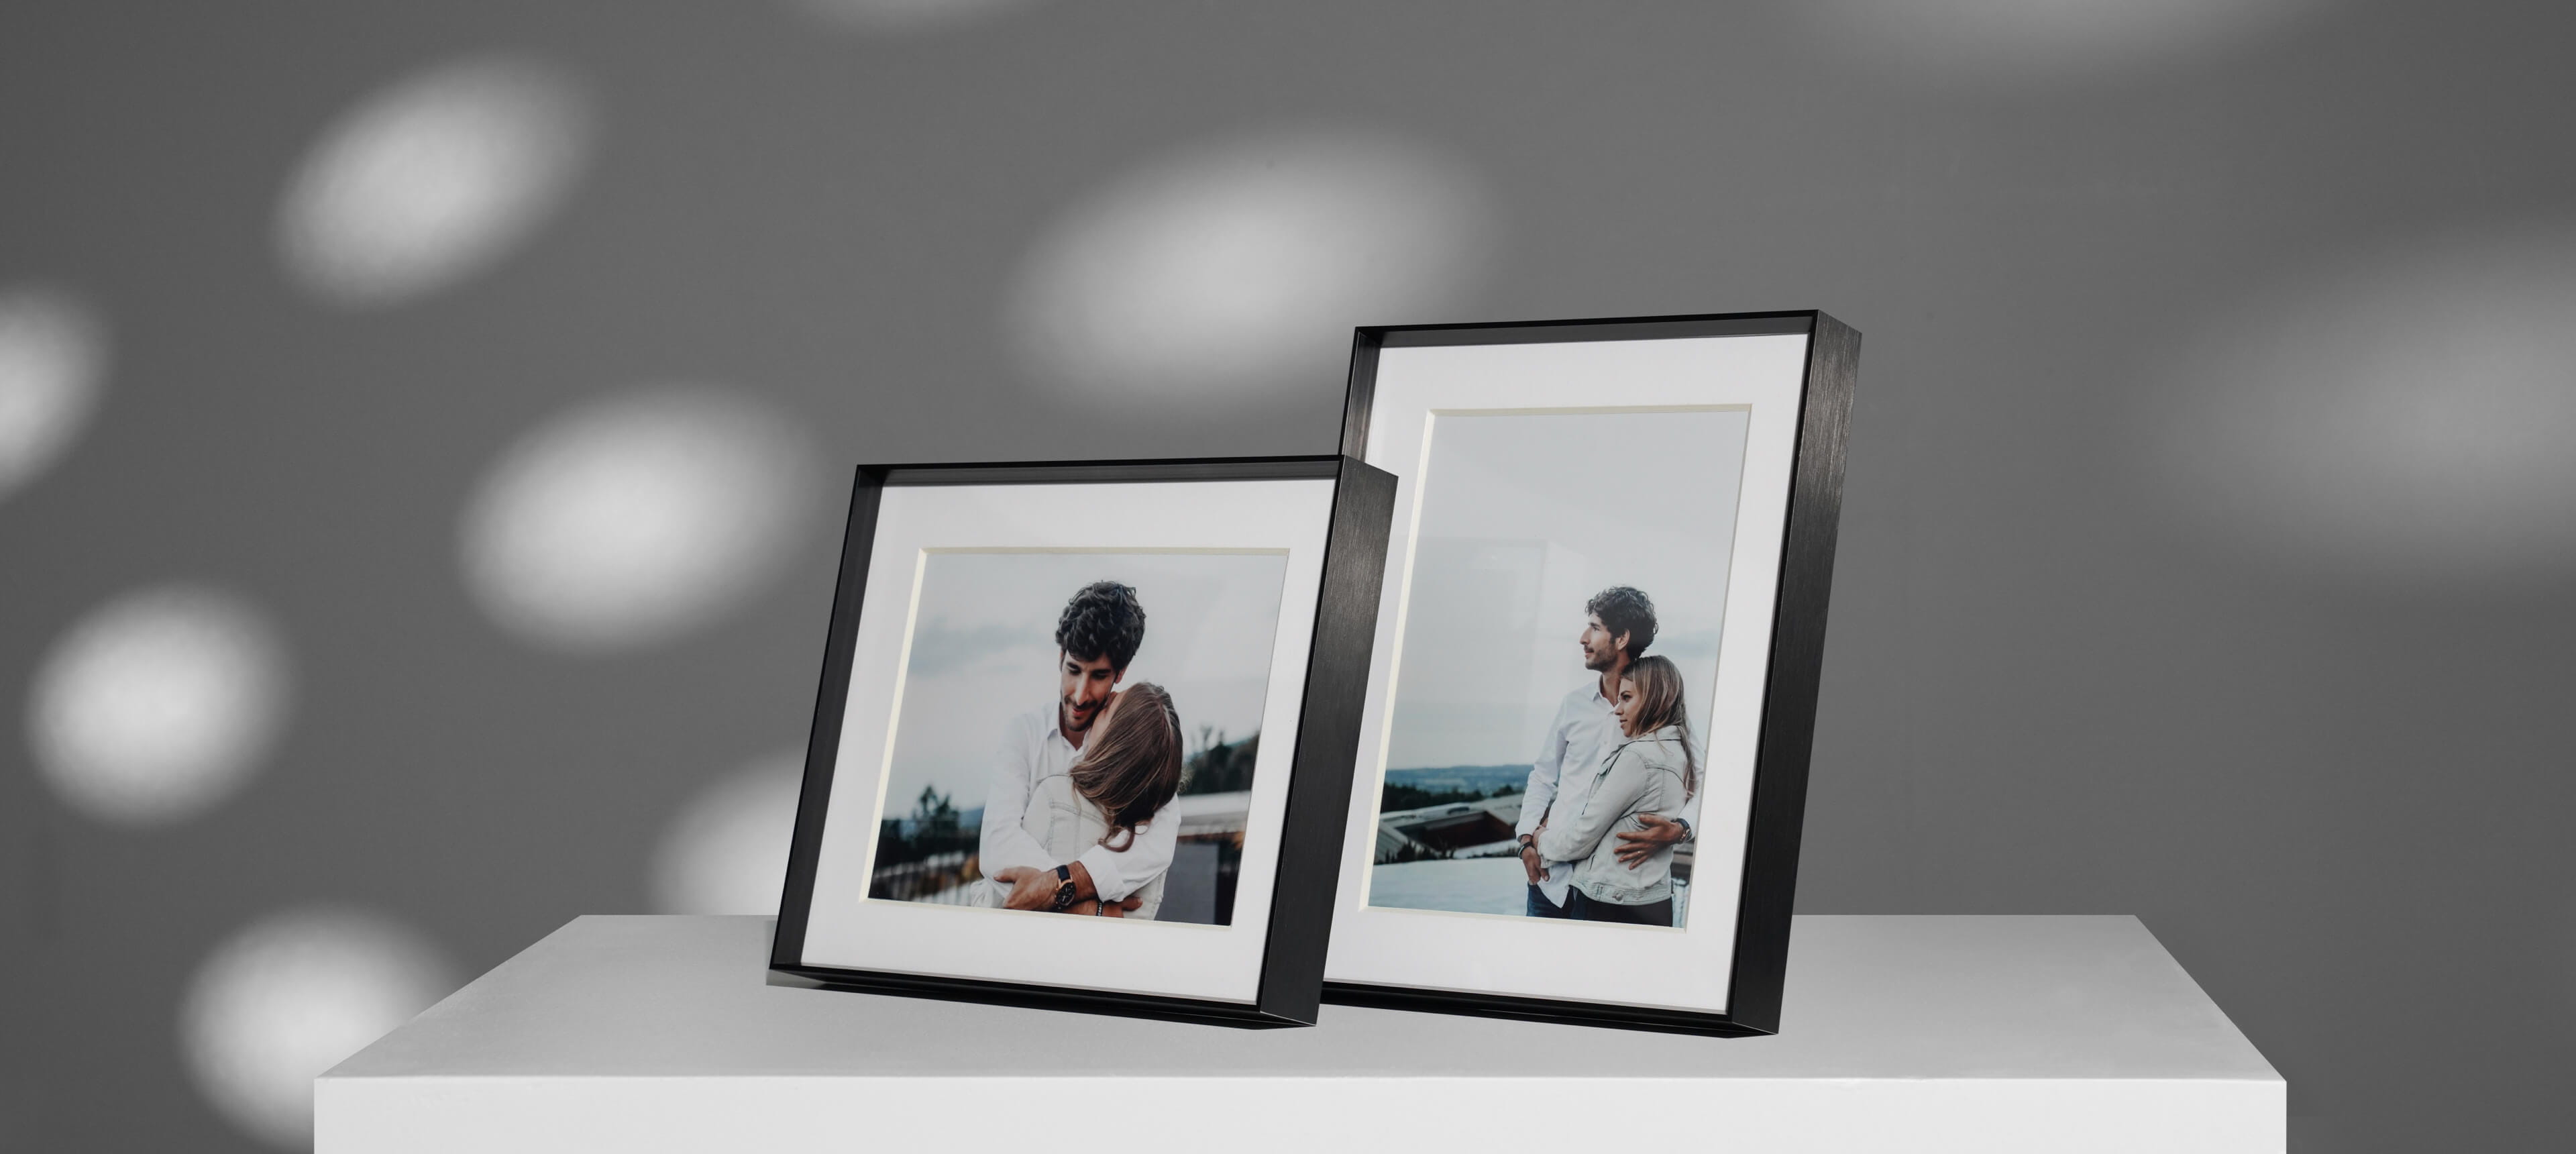 two framed tabletop metal prints on a white table showing a couple embracing